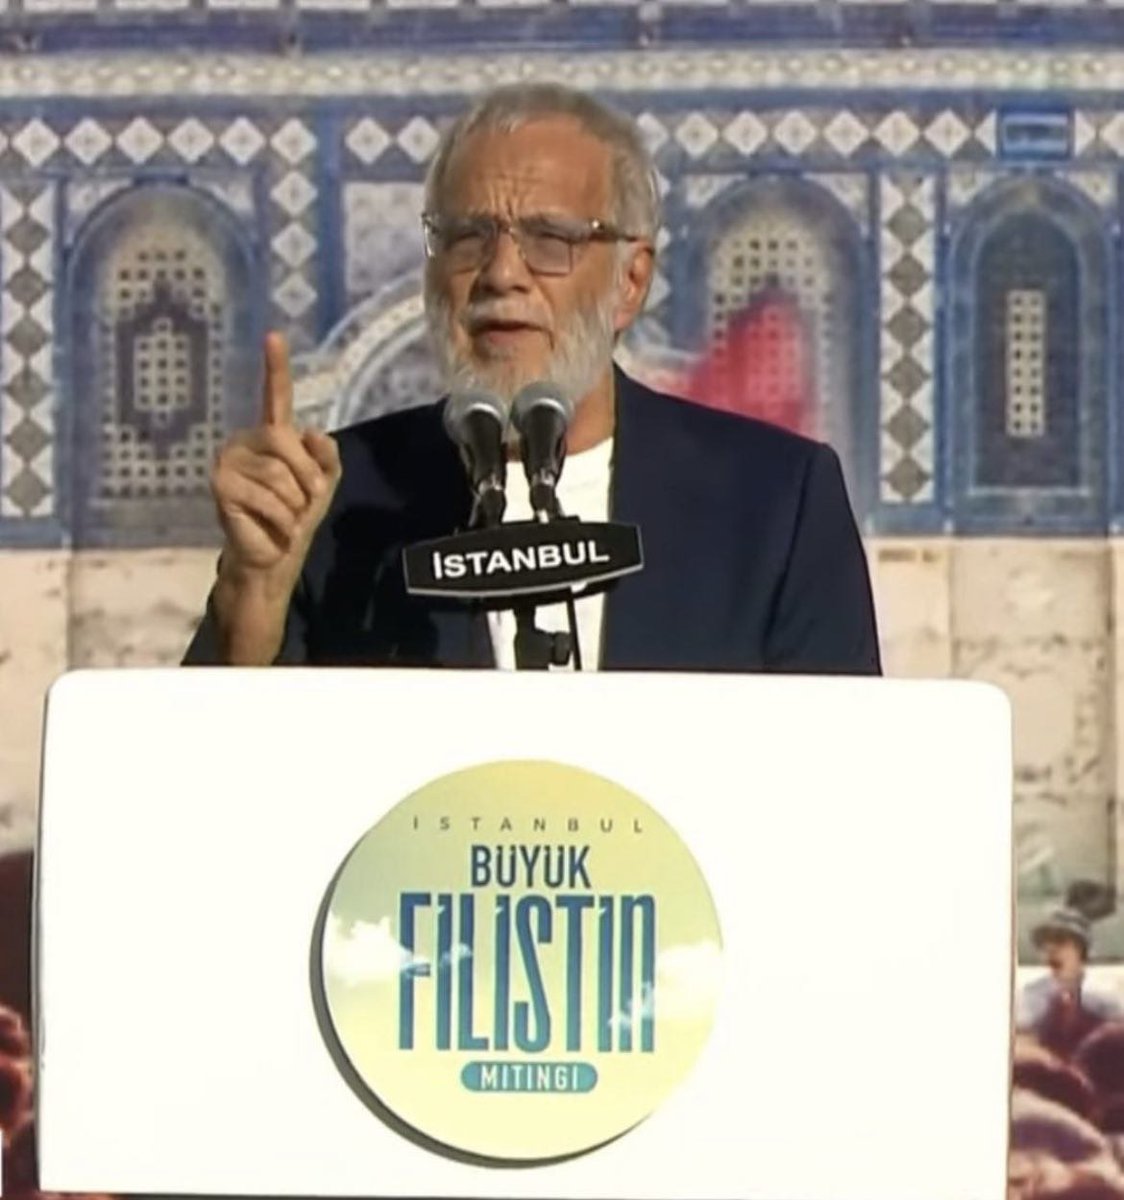 'I once wrote a song called Peace Train, and I still believe in it. I have come here to be with you, to join together for the cause of Peace and humanity, and a Free Palestine' Yusuf spoke at a rally of over 500,000 people today in Istanbul, calling for a cease fire and stopping